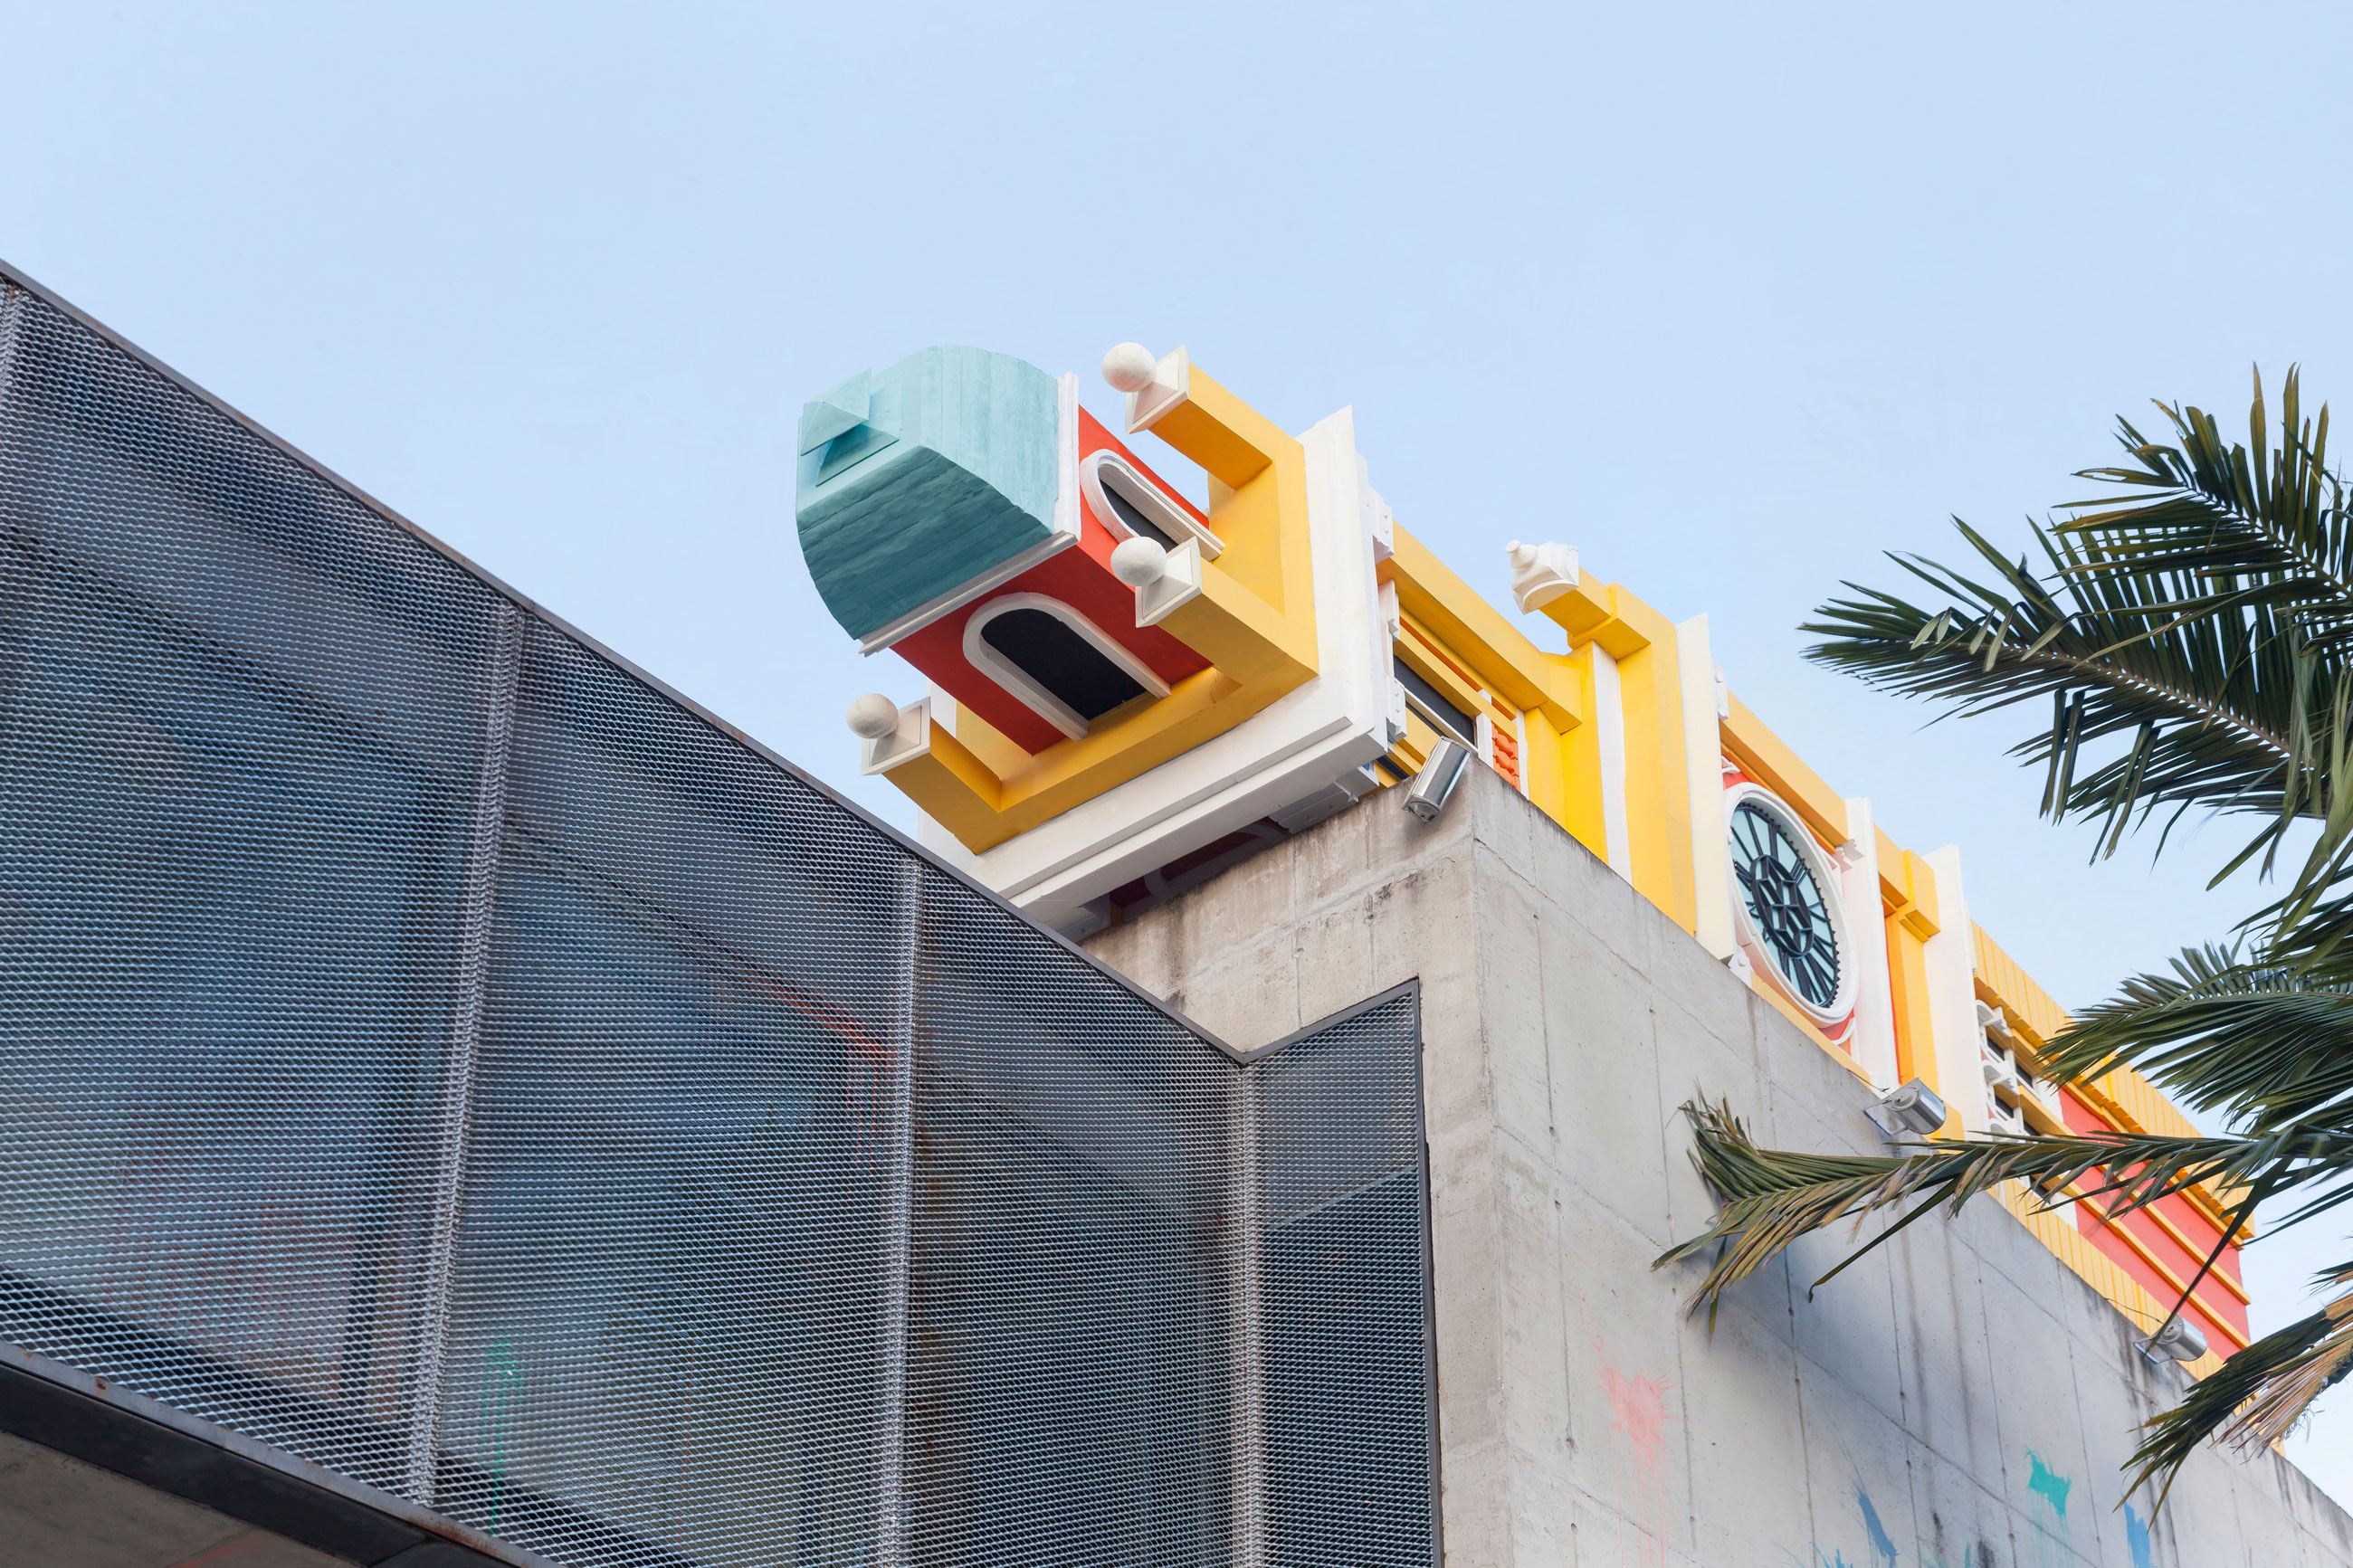 Site-specific Installation titled Friends of Perpetual Movement by artist Quinteros, consisting of a clock tower built with foam, paint, wooden structure, curated by Bruno Alves de Almeida for the project SITU at Galeria Leme, São Paulo, Brazil.